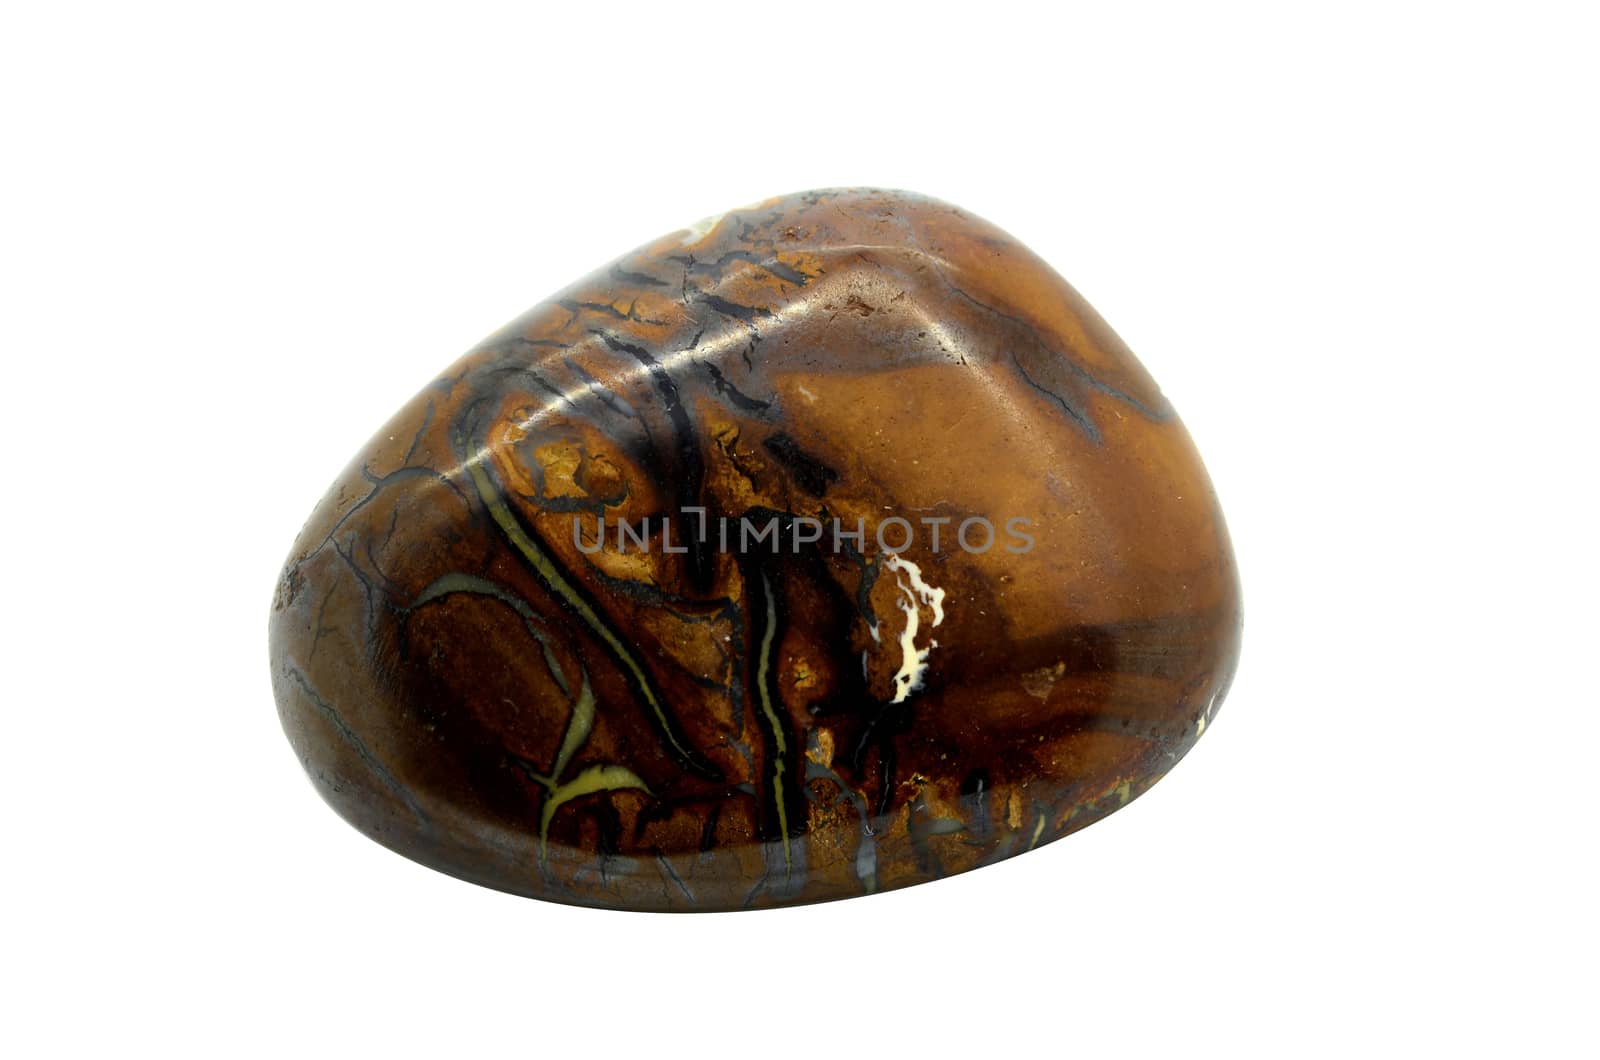 Sample of  tumbled Boulder Opal a beautiful nature specimen isolated on white background